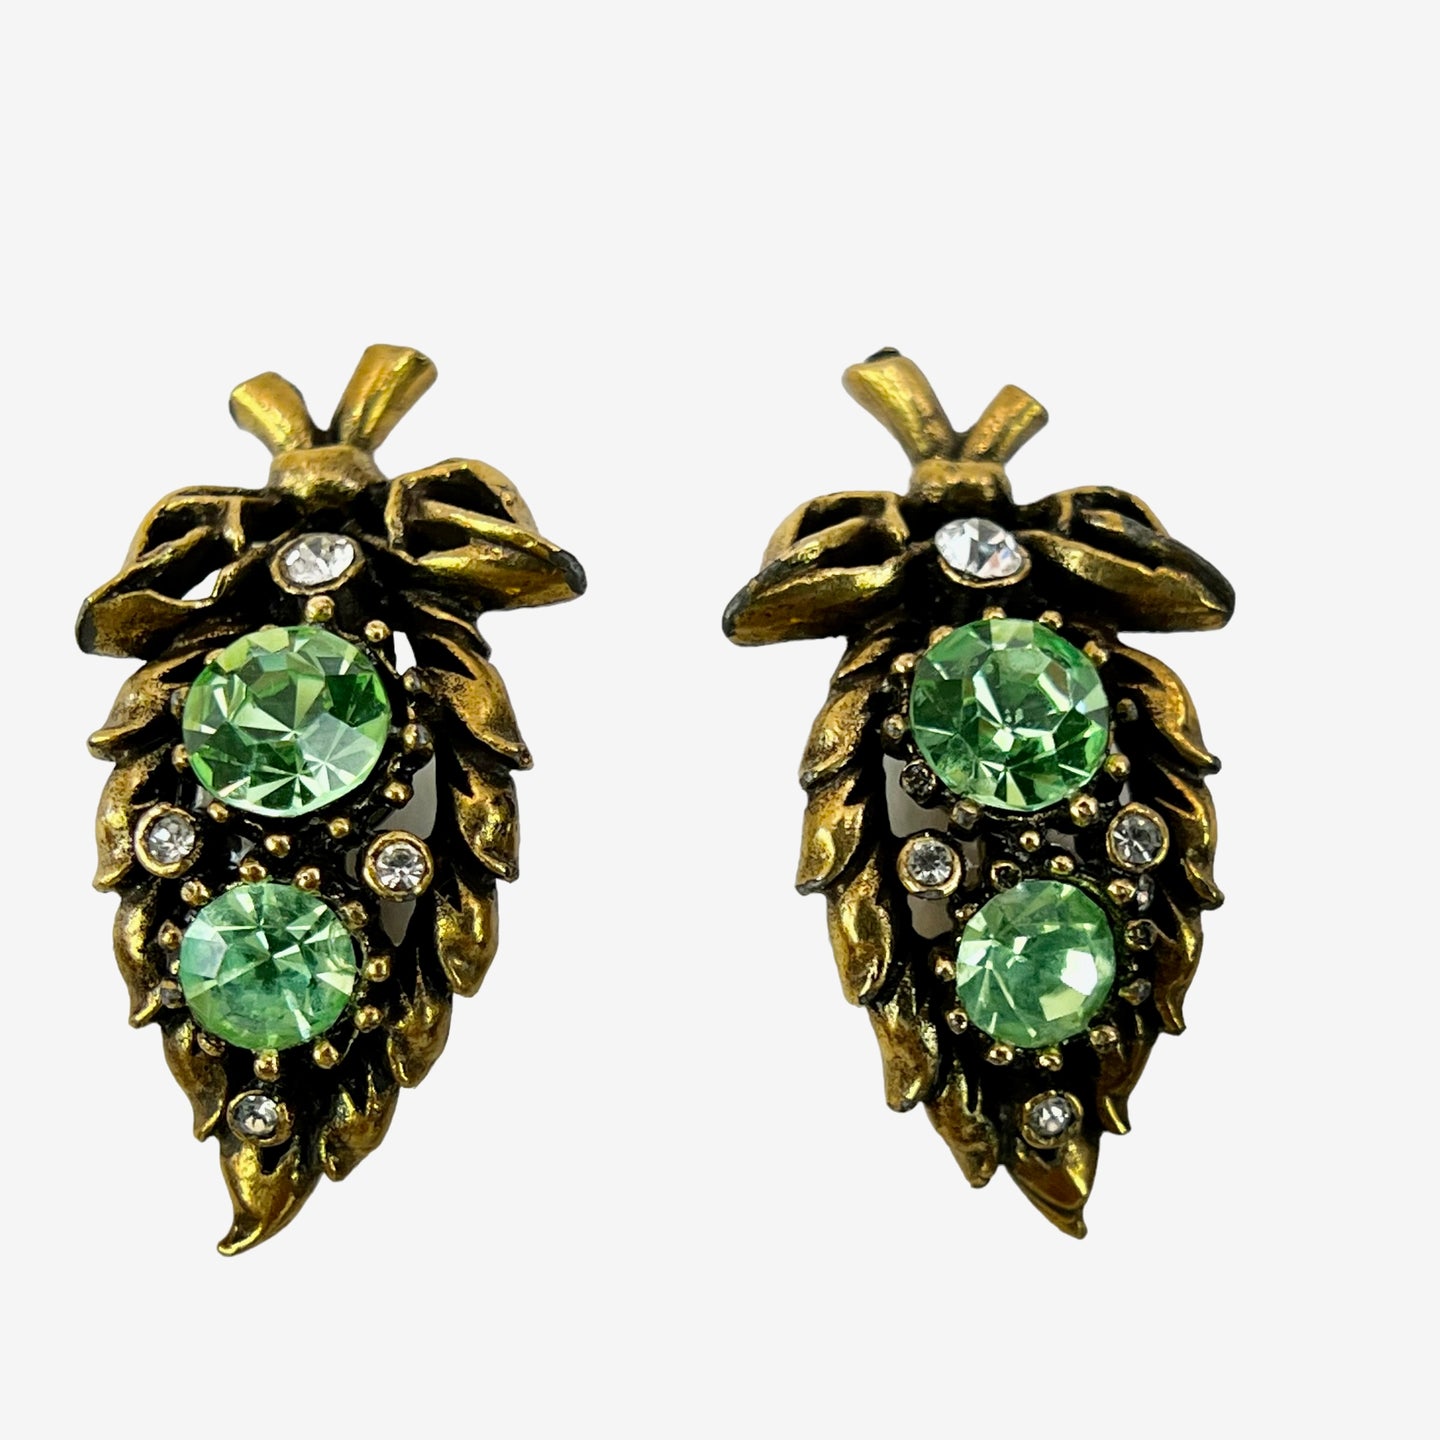 Mid Century Vintage Leaf Clip on Earrings by Coro.  Excellent vintage condition with a strong snap closure.   Processed within 1 business day (not included in shipping carrier’s estimated arrival time). Tracking uploaded immediately upon shipment.